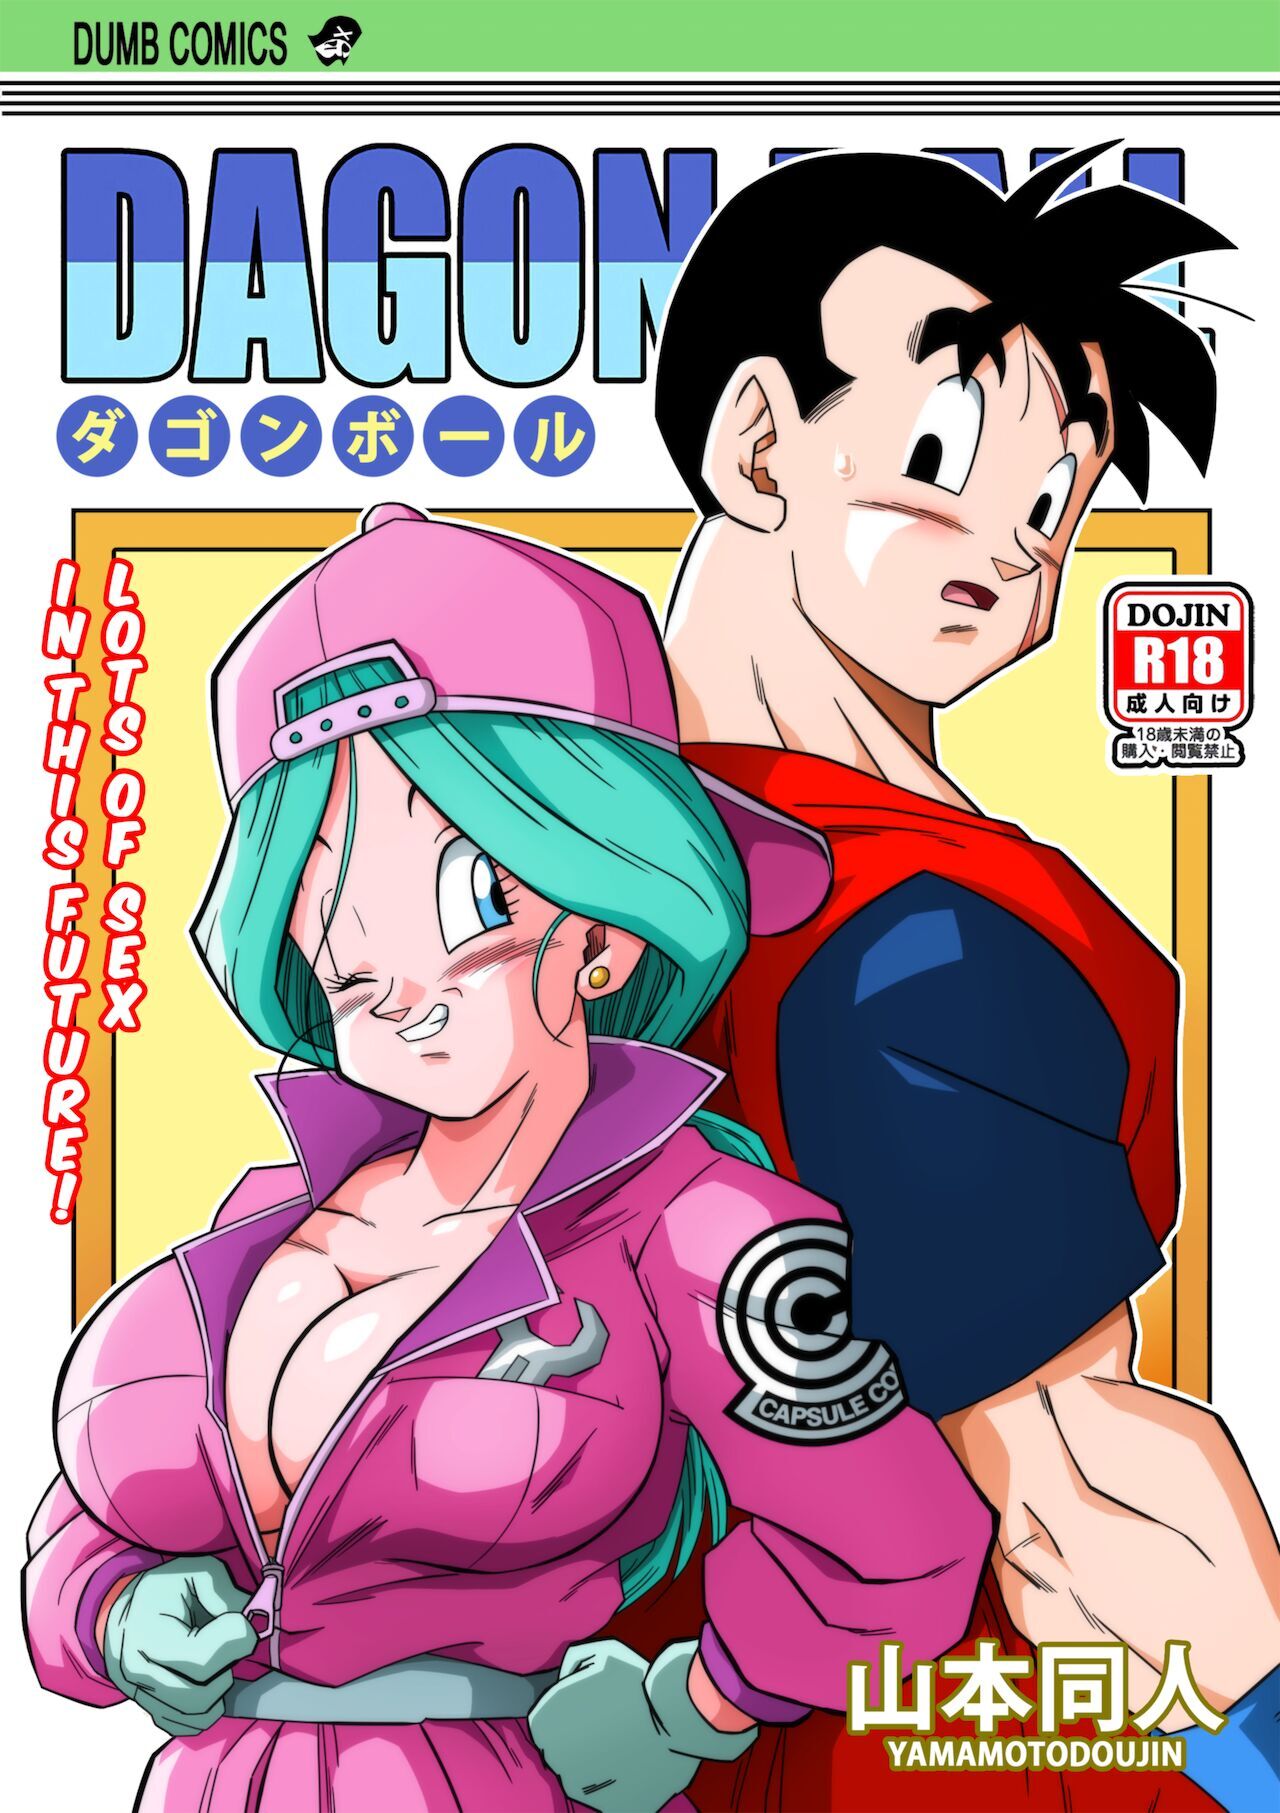 Lots of Sex in this Future!! - English - Dragon Ball Hentai